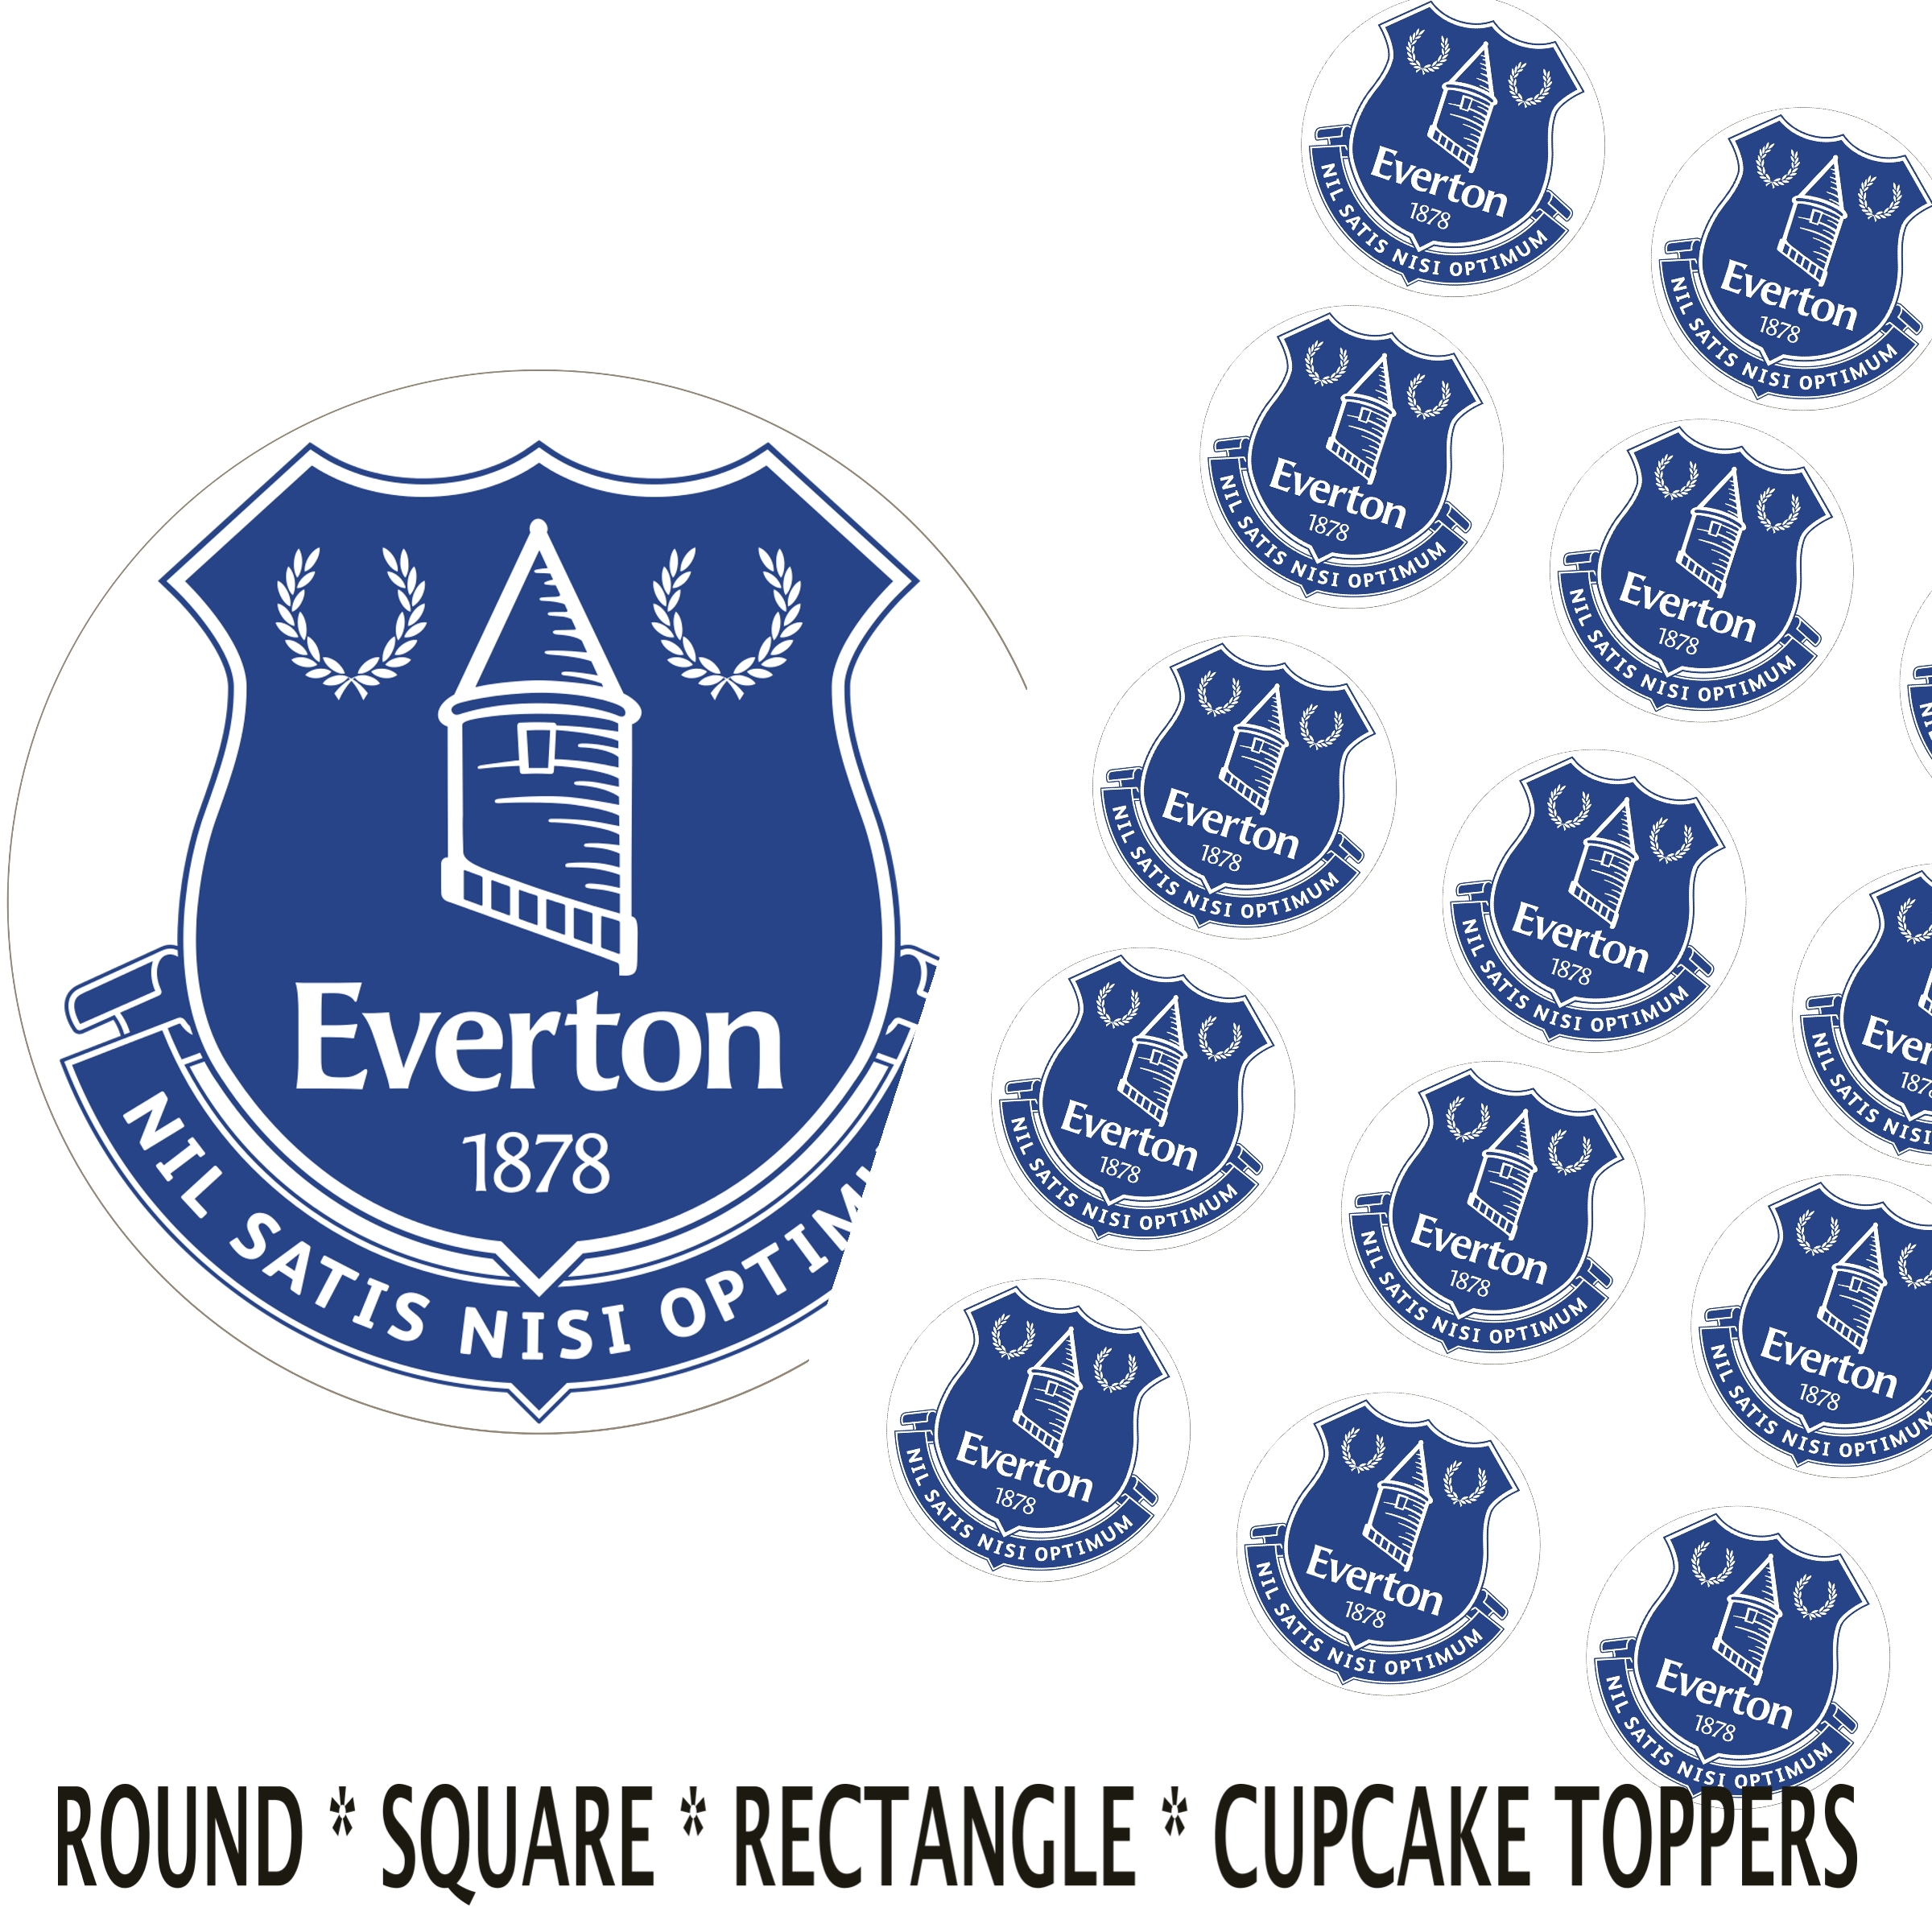 Edible Everton Cake Topper Personalised - Edible Printed Toppers